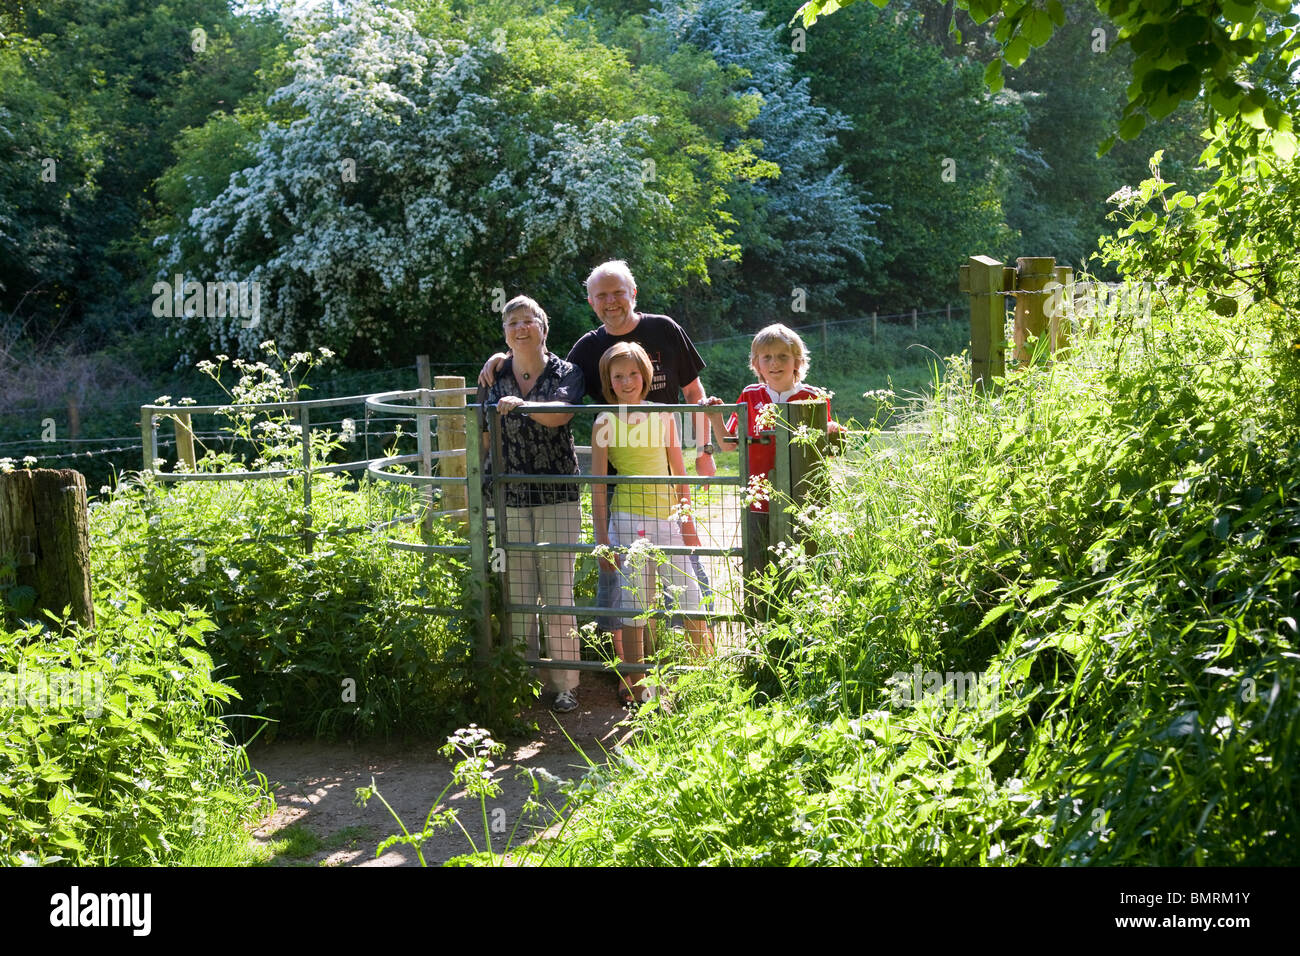 Family enjoying themselves in the countryside Stock Photo